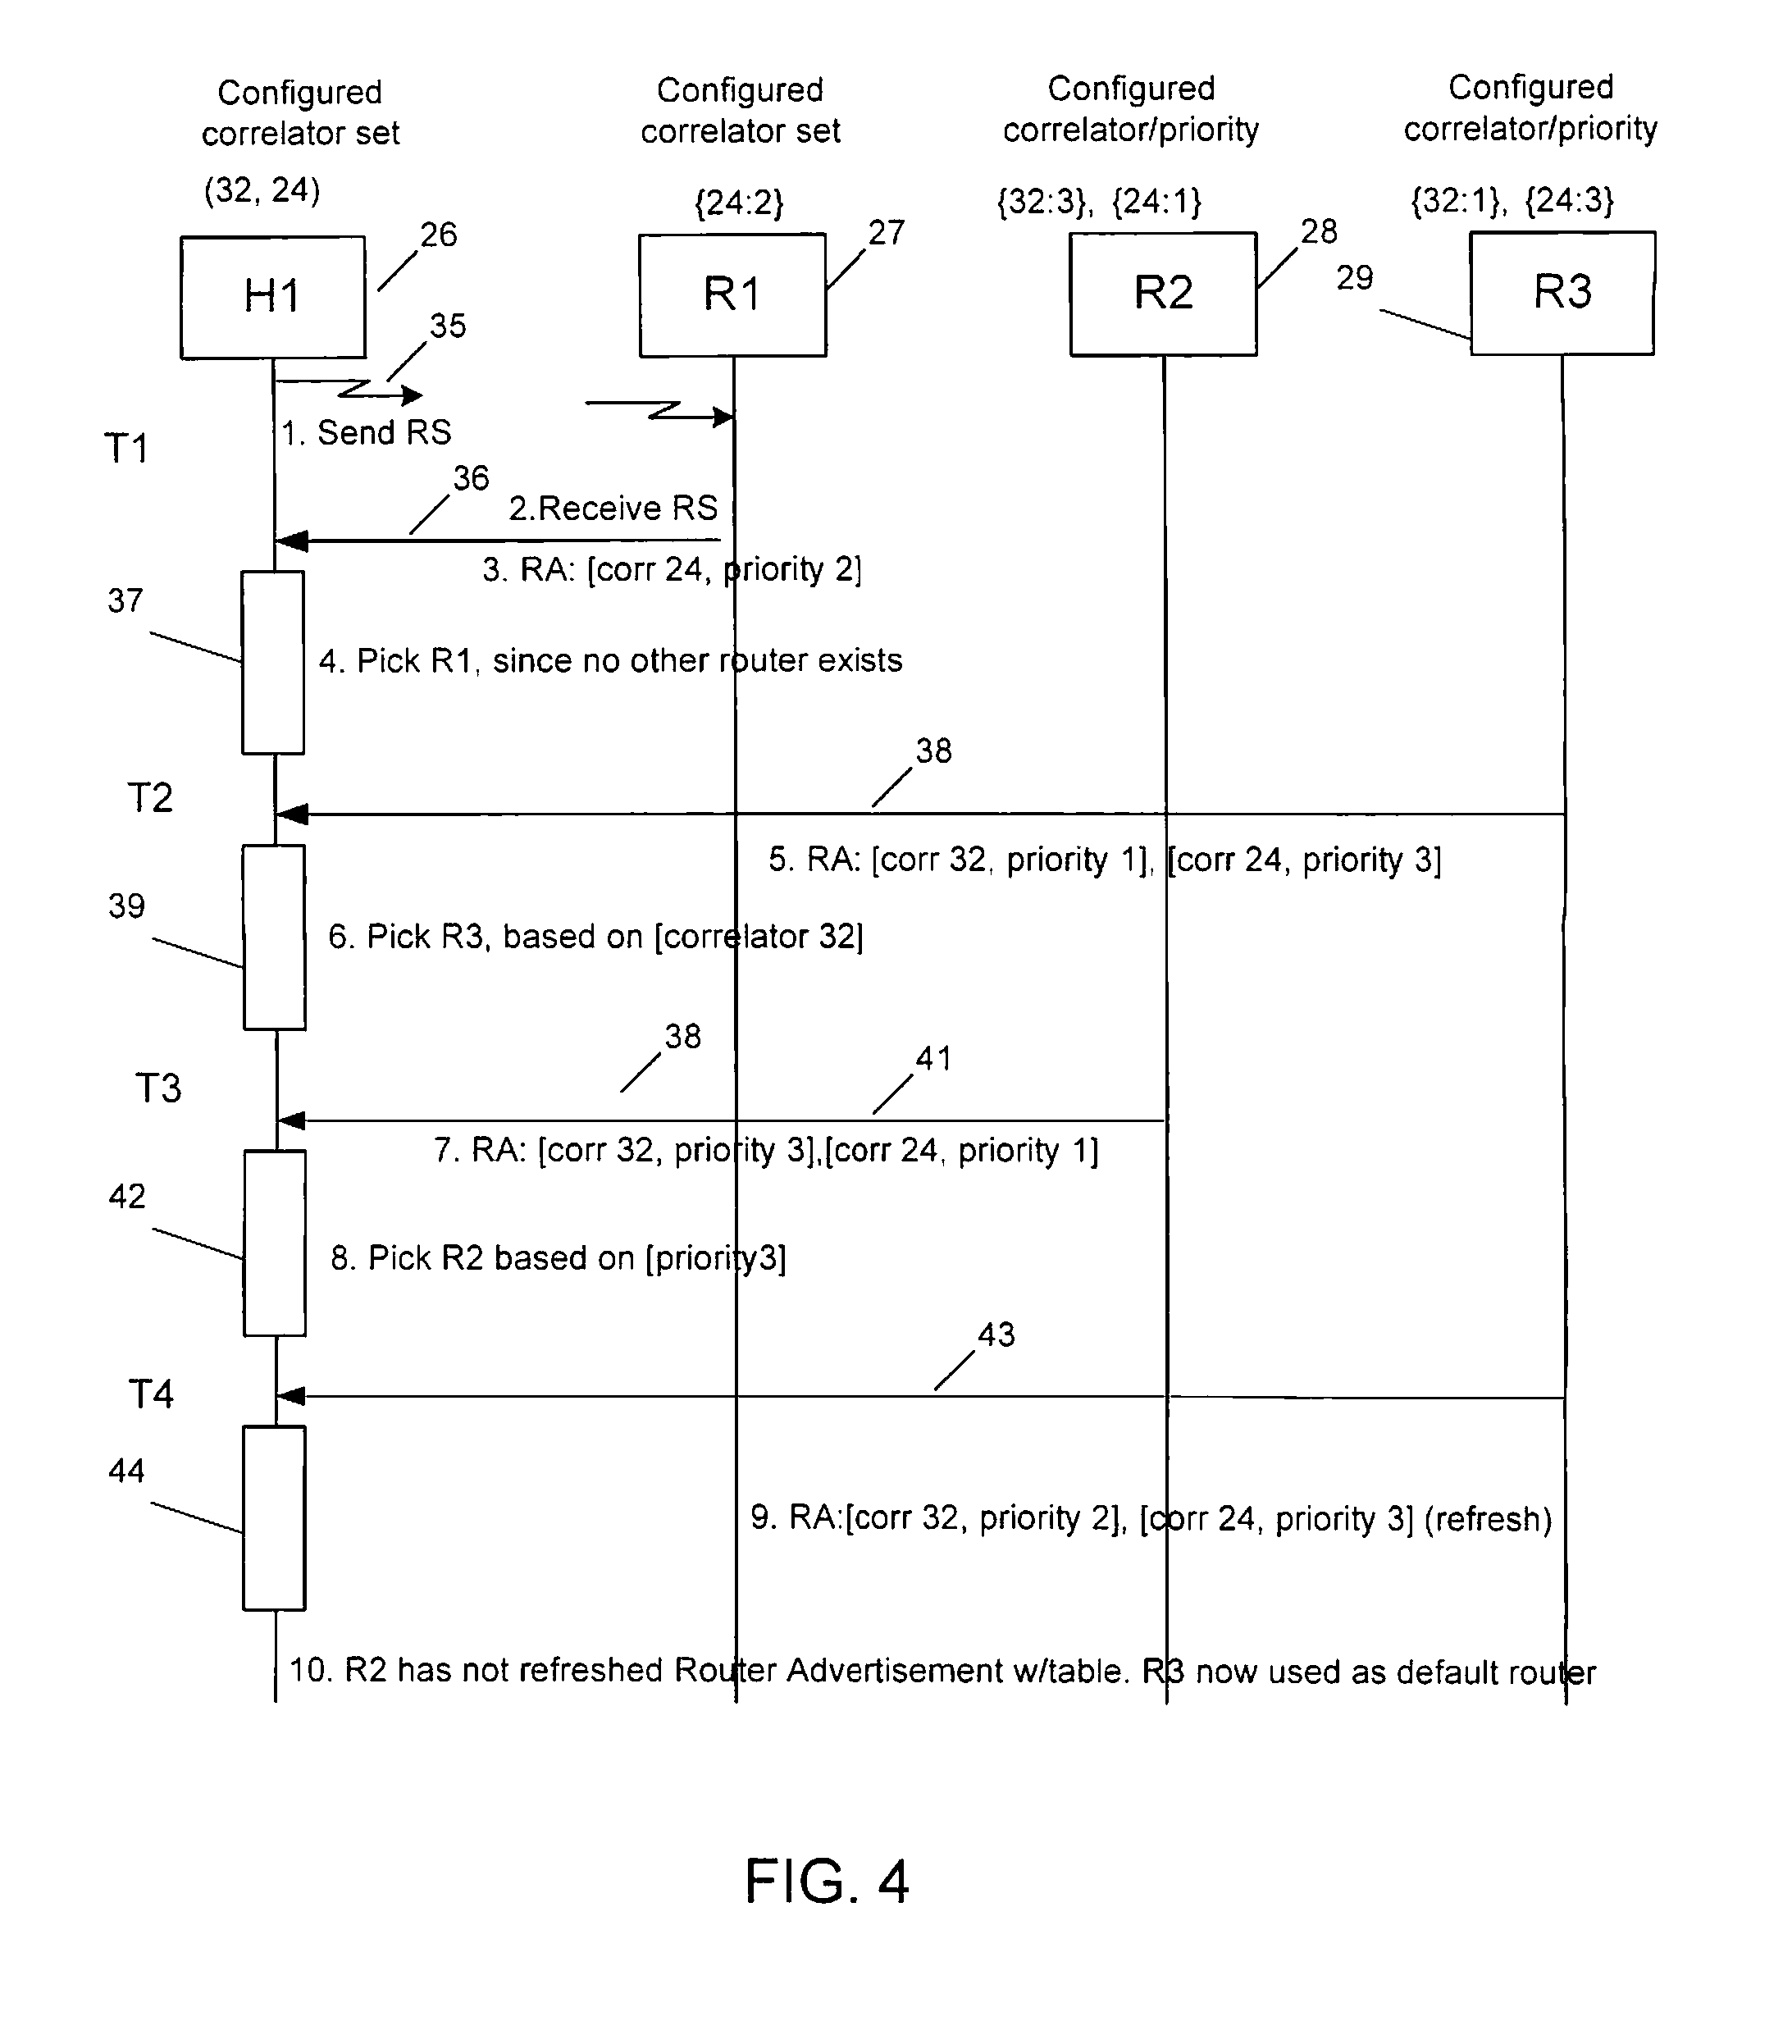 Method and System for Assigning Routers to Hosts